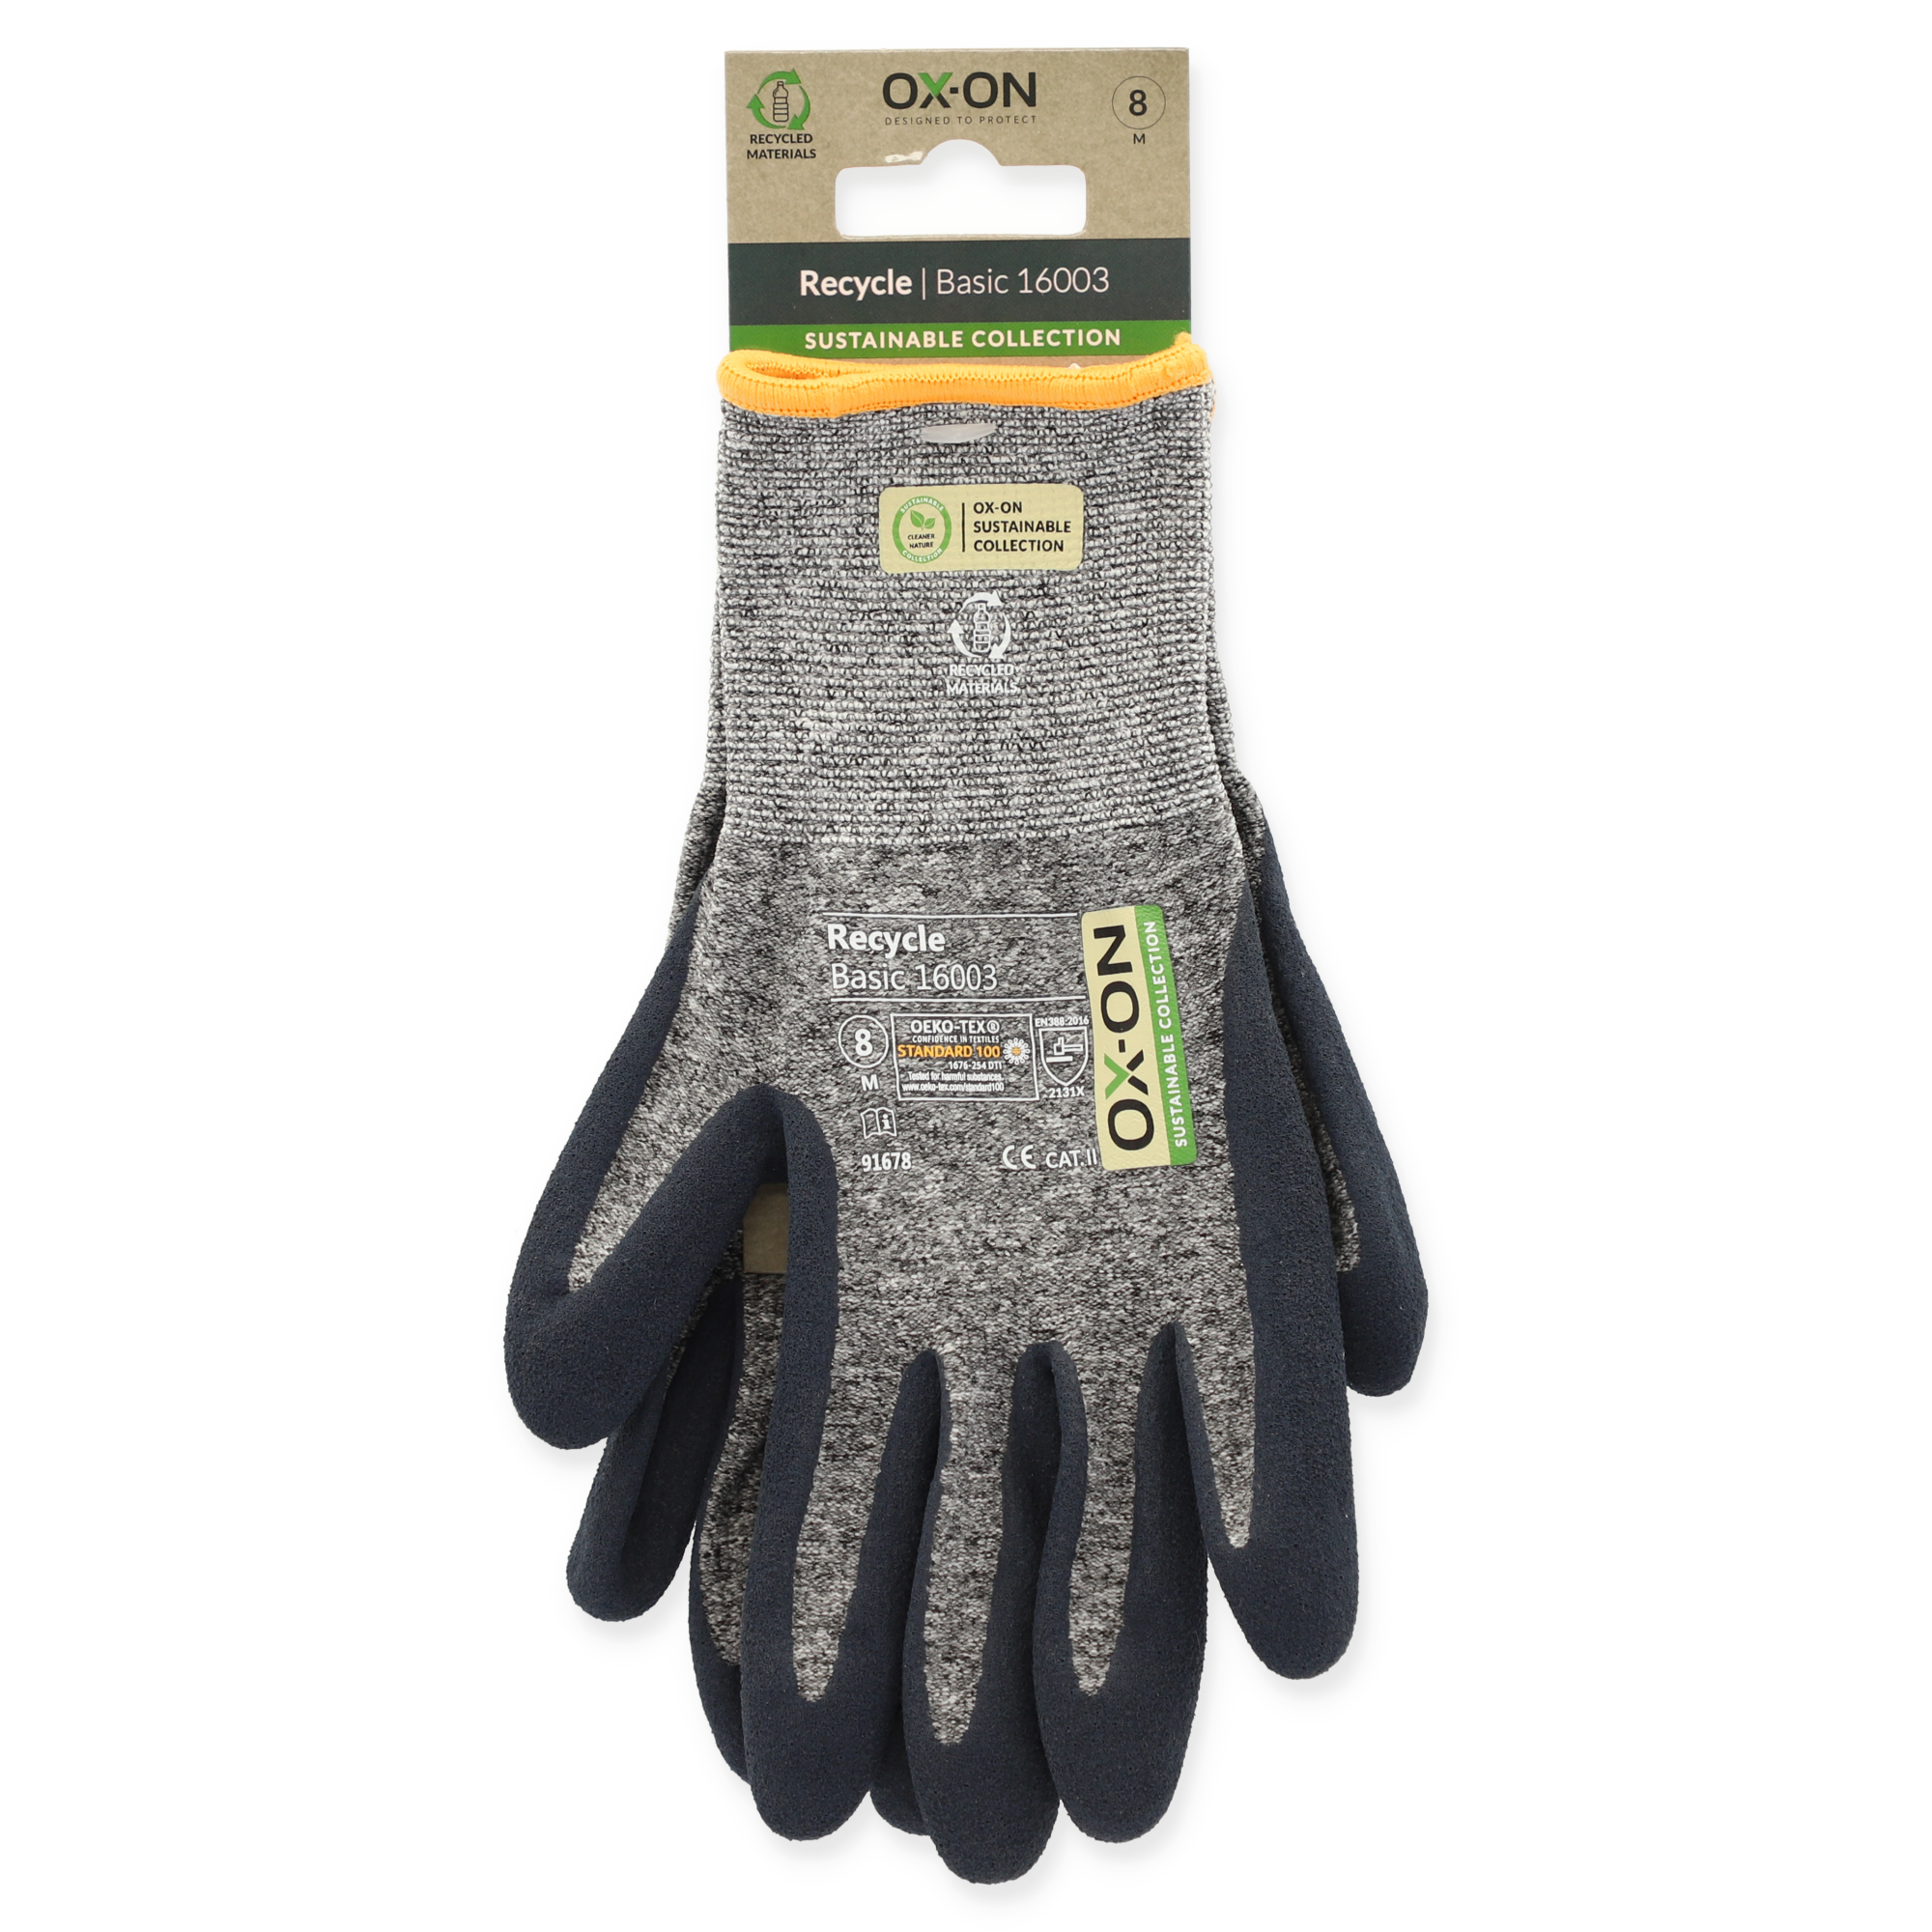 Handschuhe 'Recycle Basic 16003' grau Gr. 11 + product picture